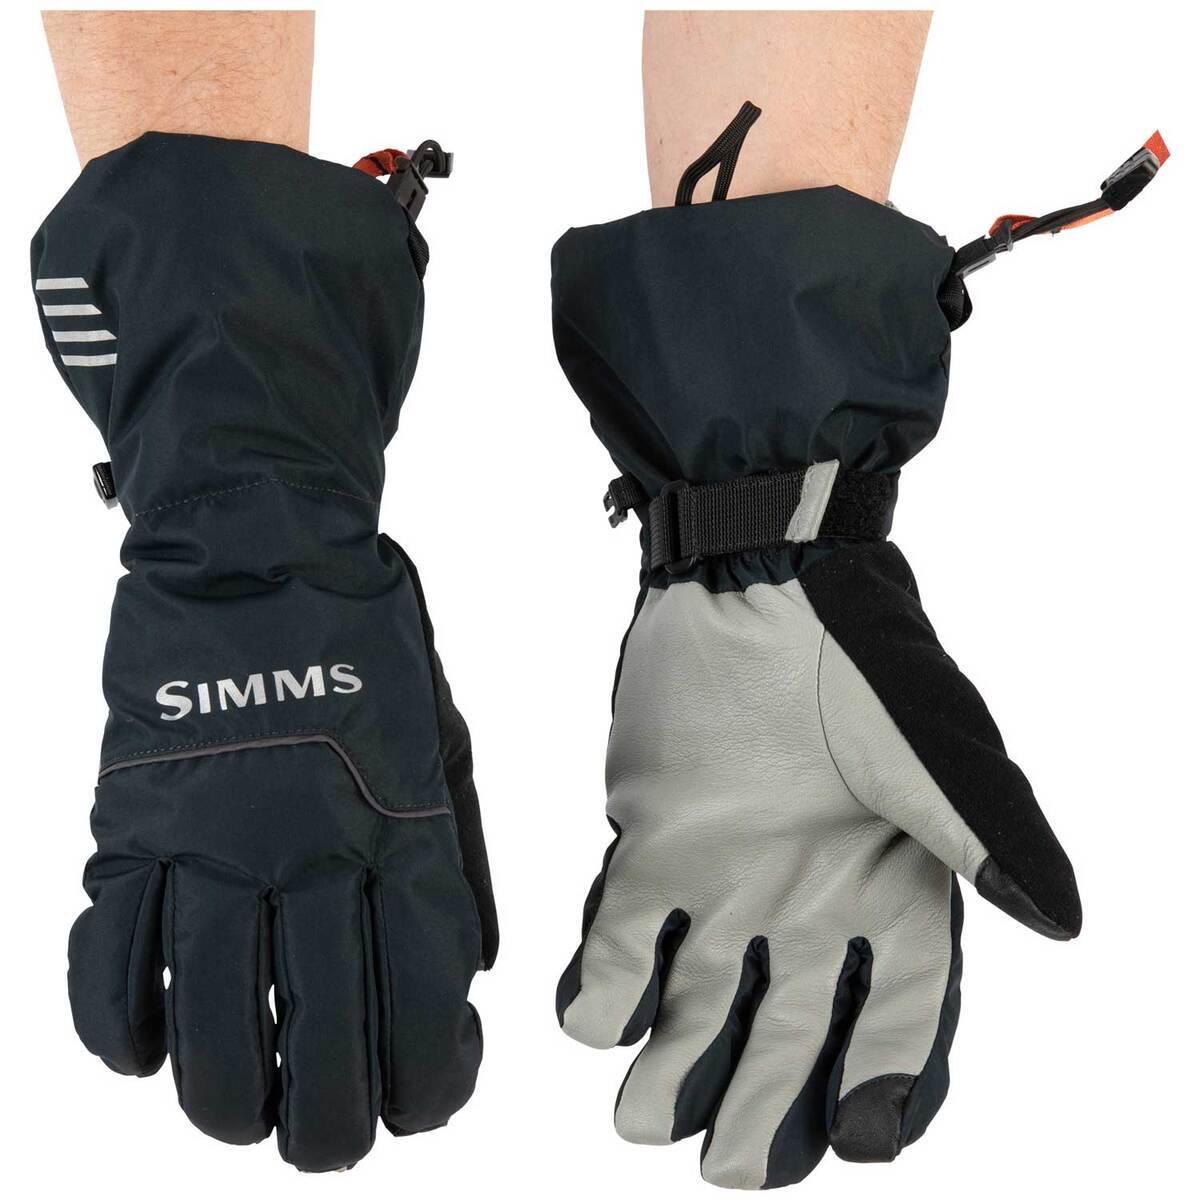 Simms Challenger Insulated Glove - Black - L